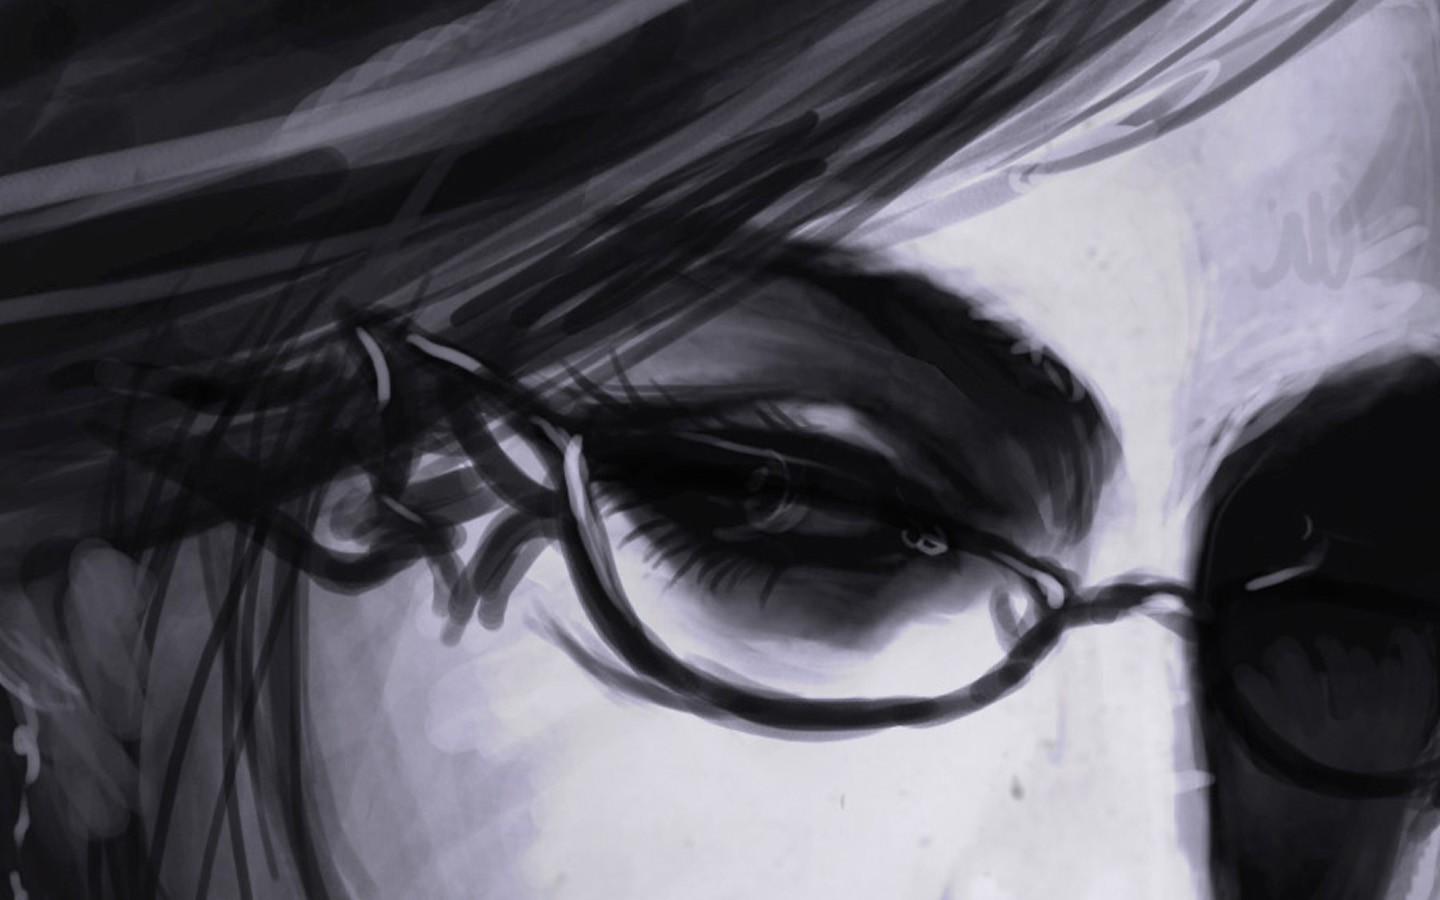 General 1440x900 Bayonetta video games glasses artwork video game girls closeup fan art video game art women with glasses